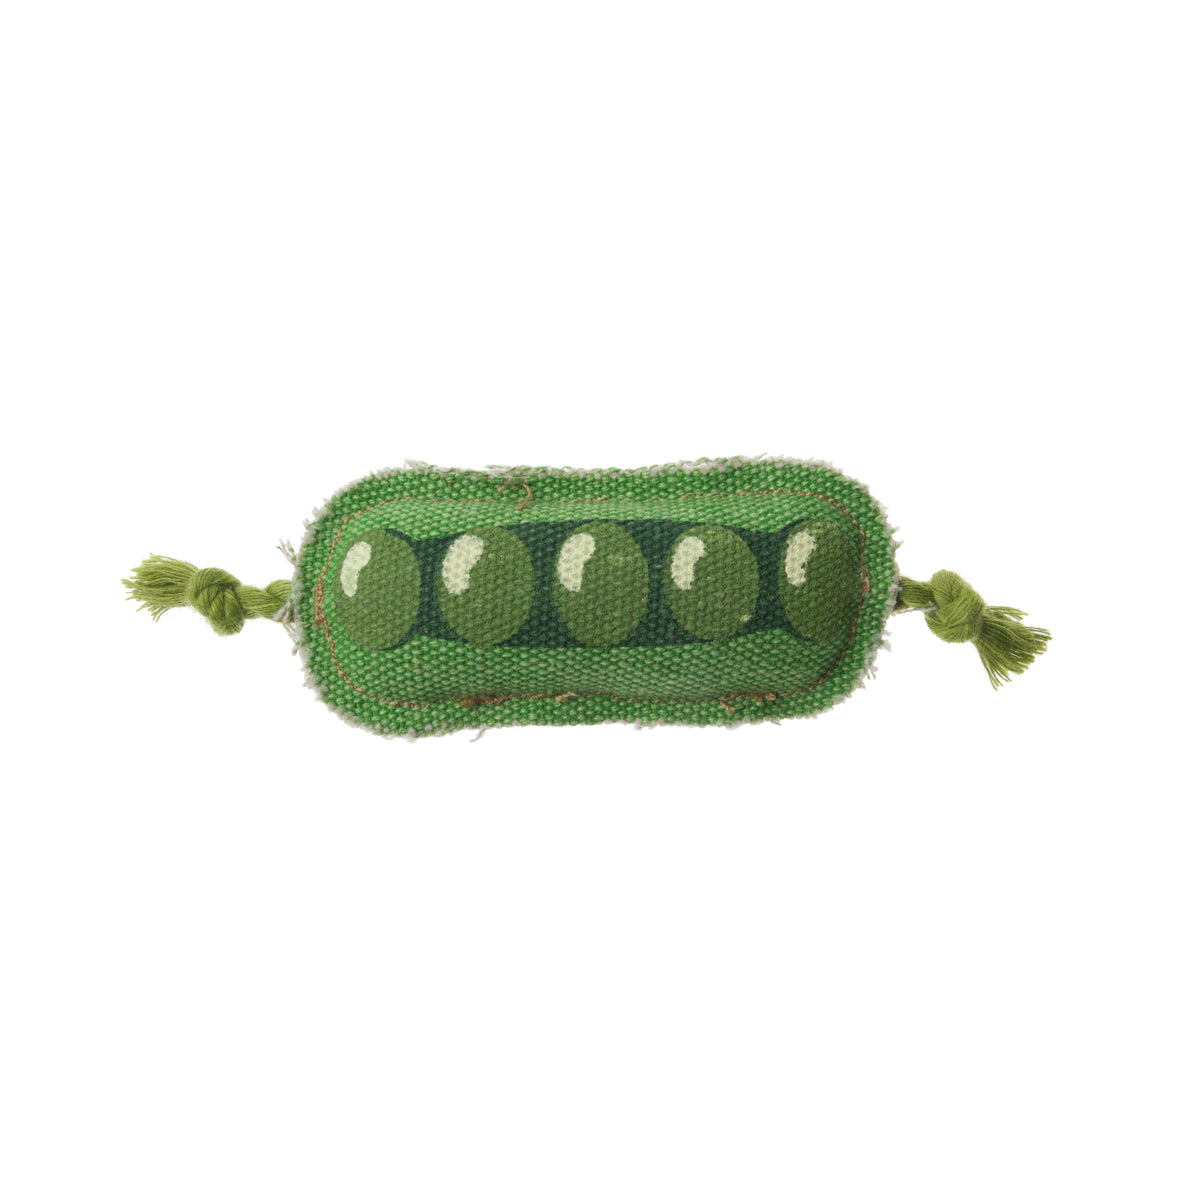 Veggie Box Dog Toy Set Peas in a Pod by Sophie Allport